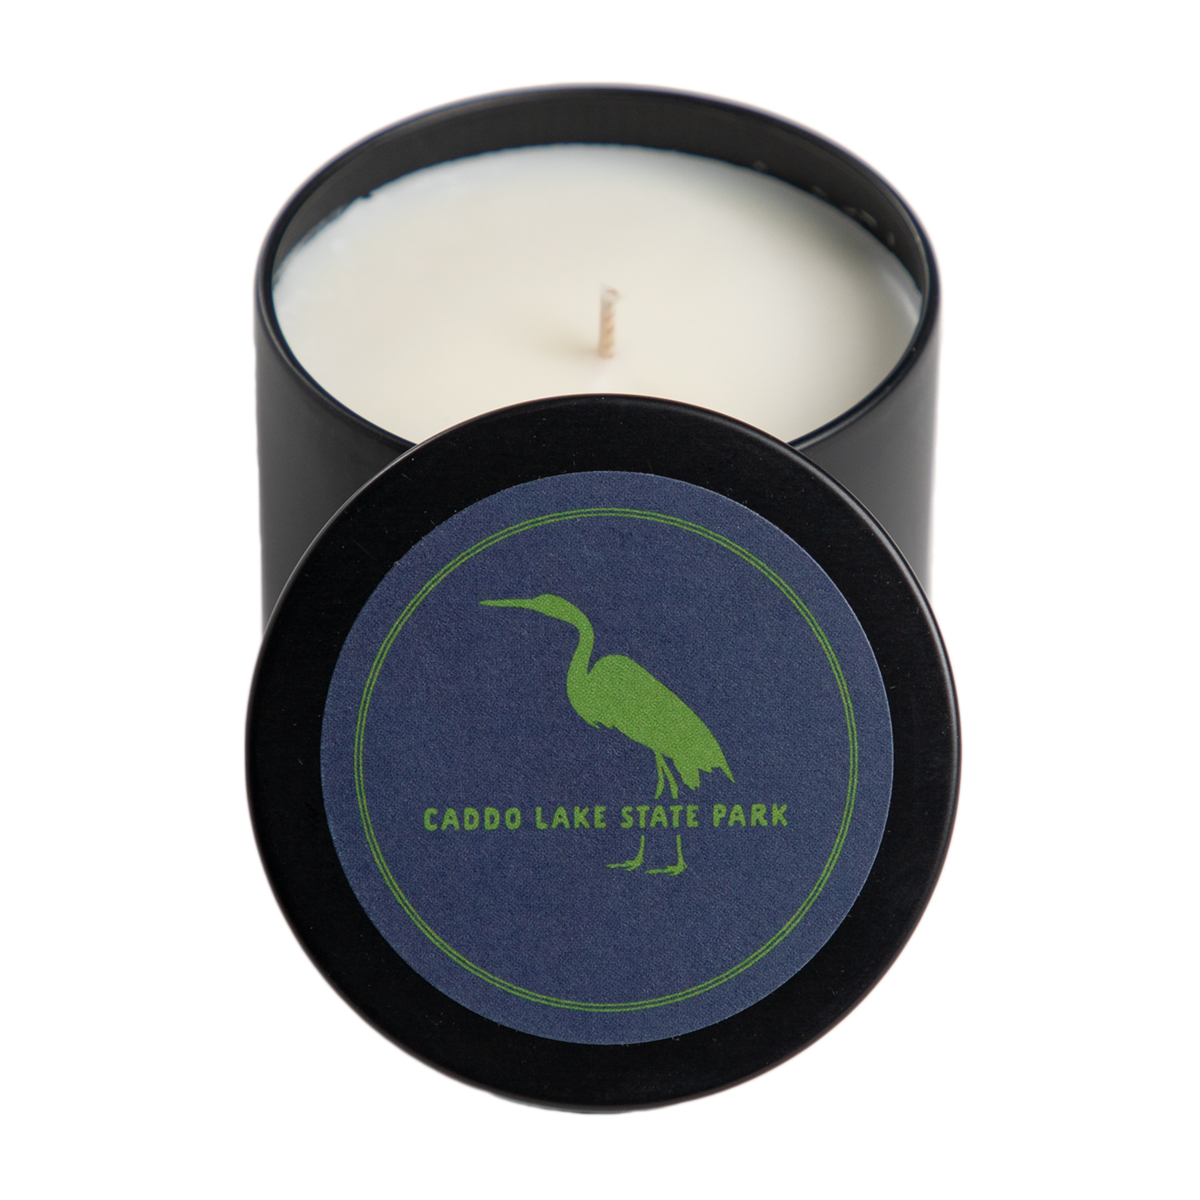 Caddo Lake State Park Candle, 4 oz.